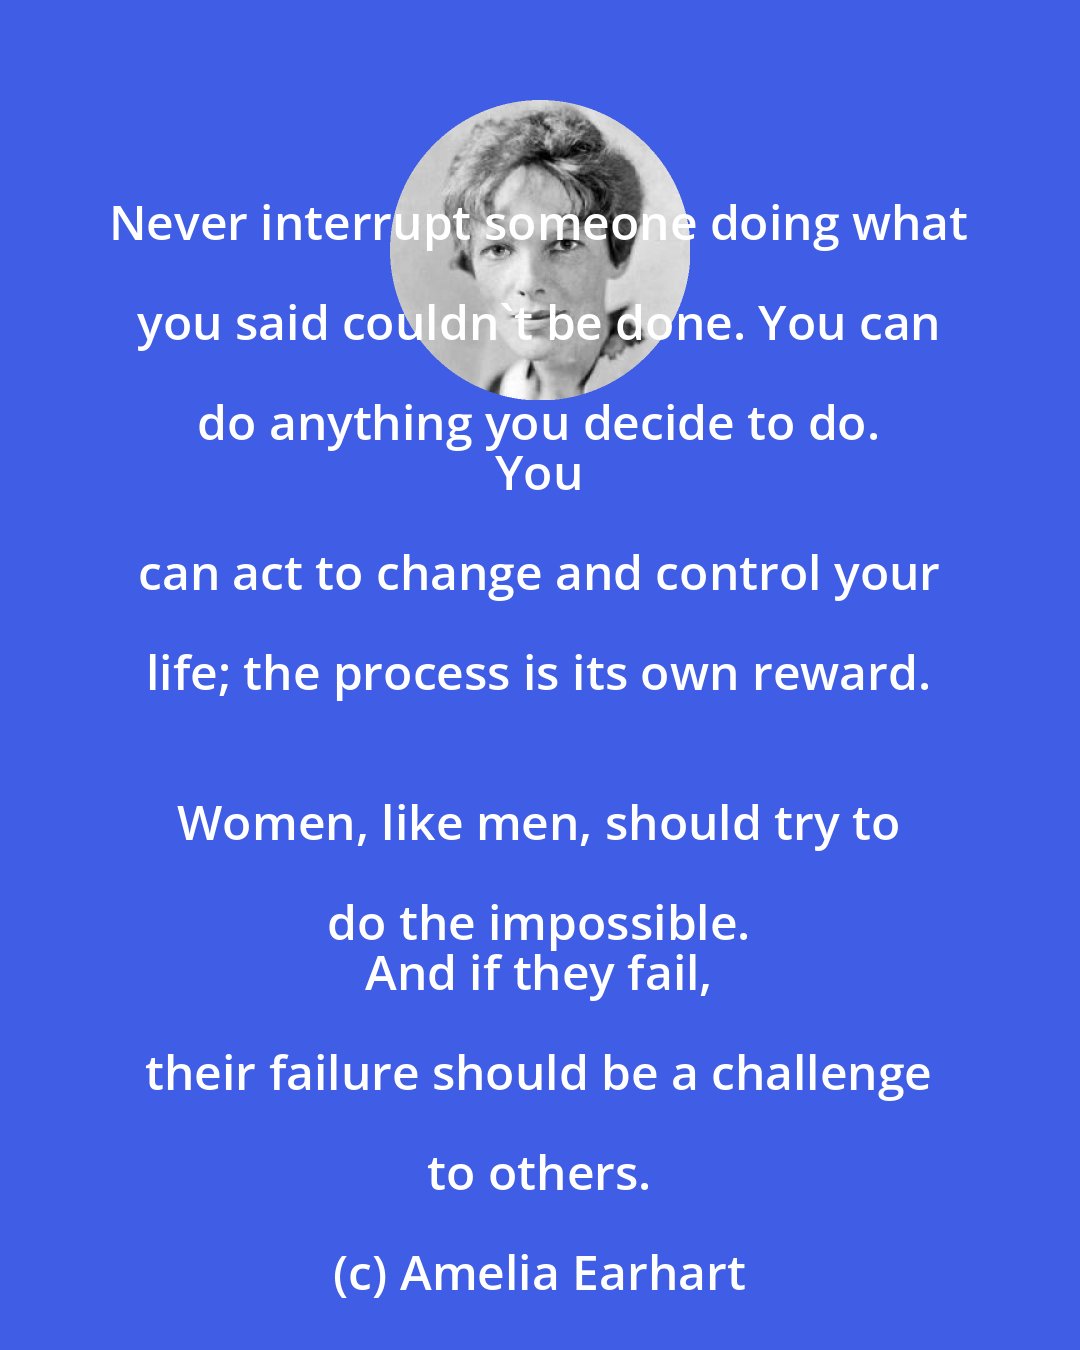 Amelia Earhart: Never interrupt someone doing what you said couldn't be done. You can do anything you decide to do. 
 You can act to change and control your life; the process is its own reward. 
 Women, like men, should try to do the impossible. 
 And if they fail, their failure should be a challenge to others.